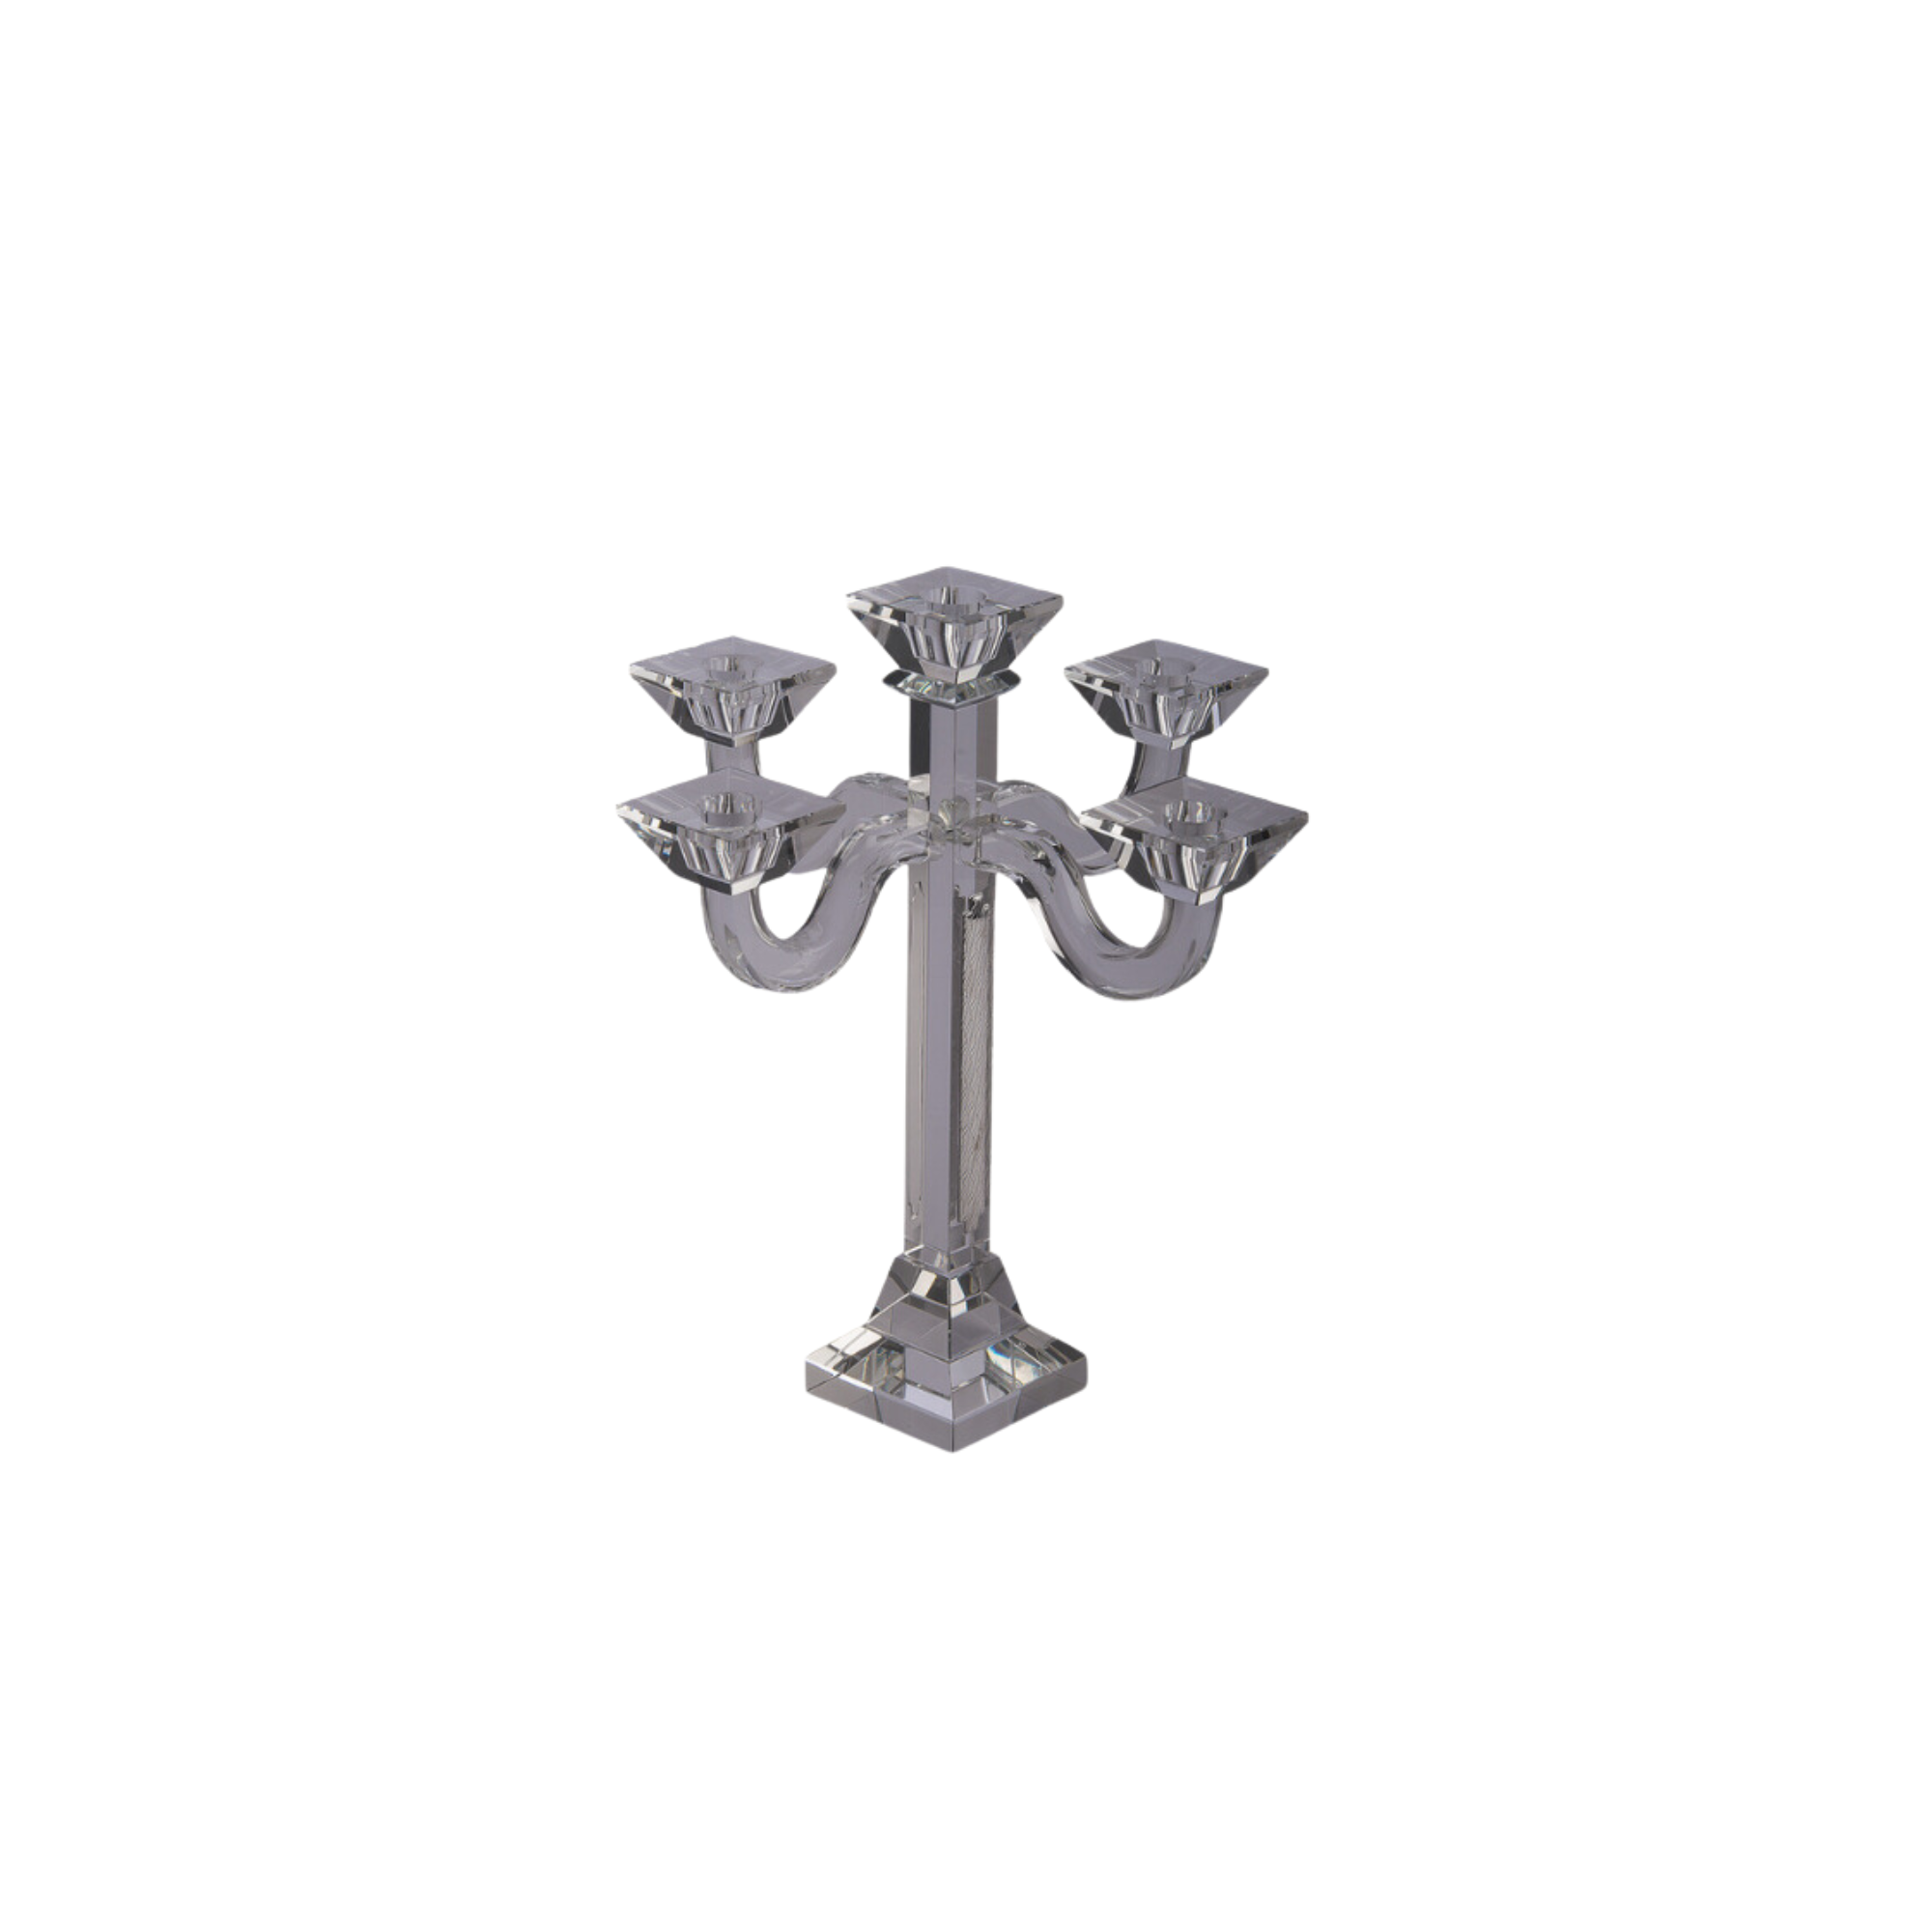 13"H Crystal and SS 5 Branch Candelabra